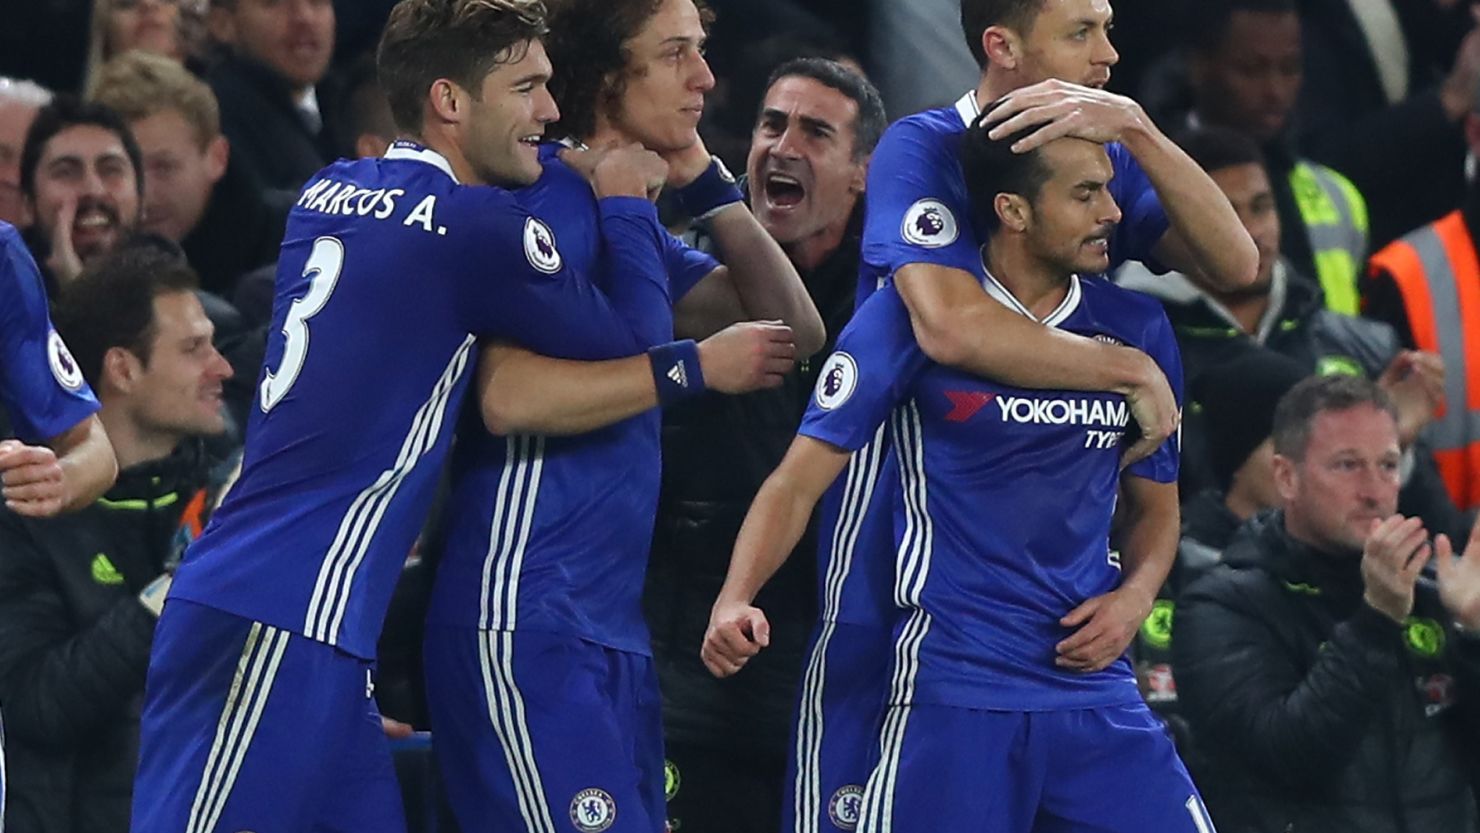 Pedro (far right) is congratulated after scoring his team's first goal in the 2-1 win over Tottenham Hotspur at Stamford Bridge.
